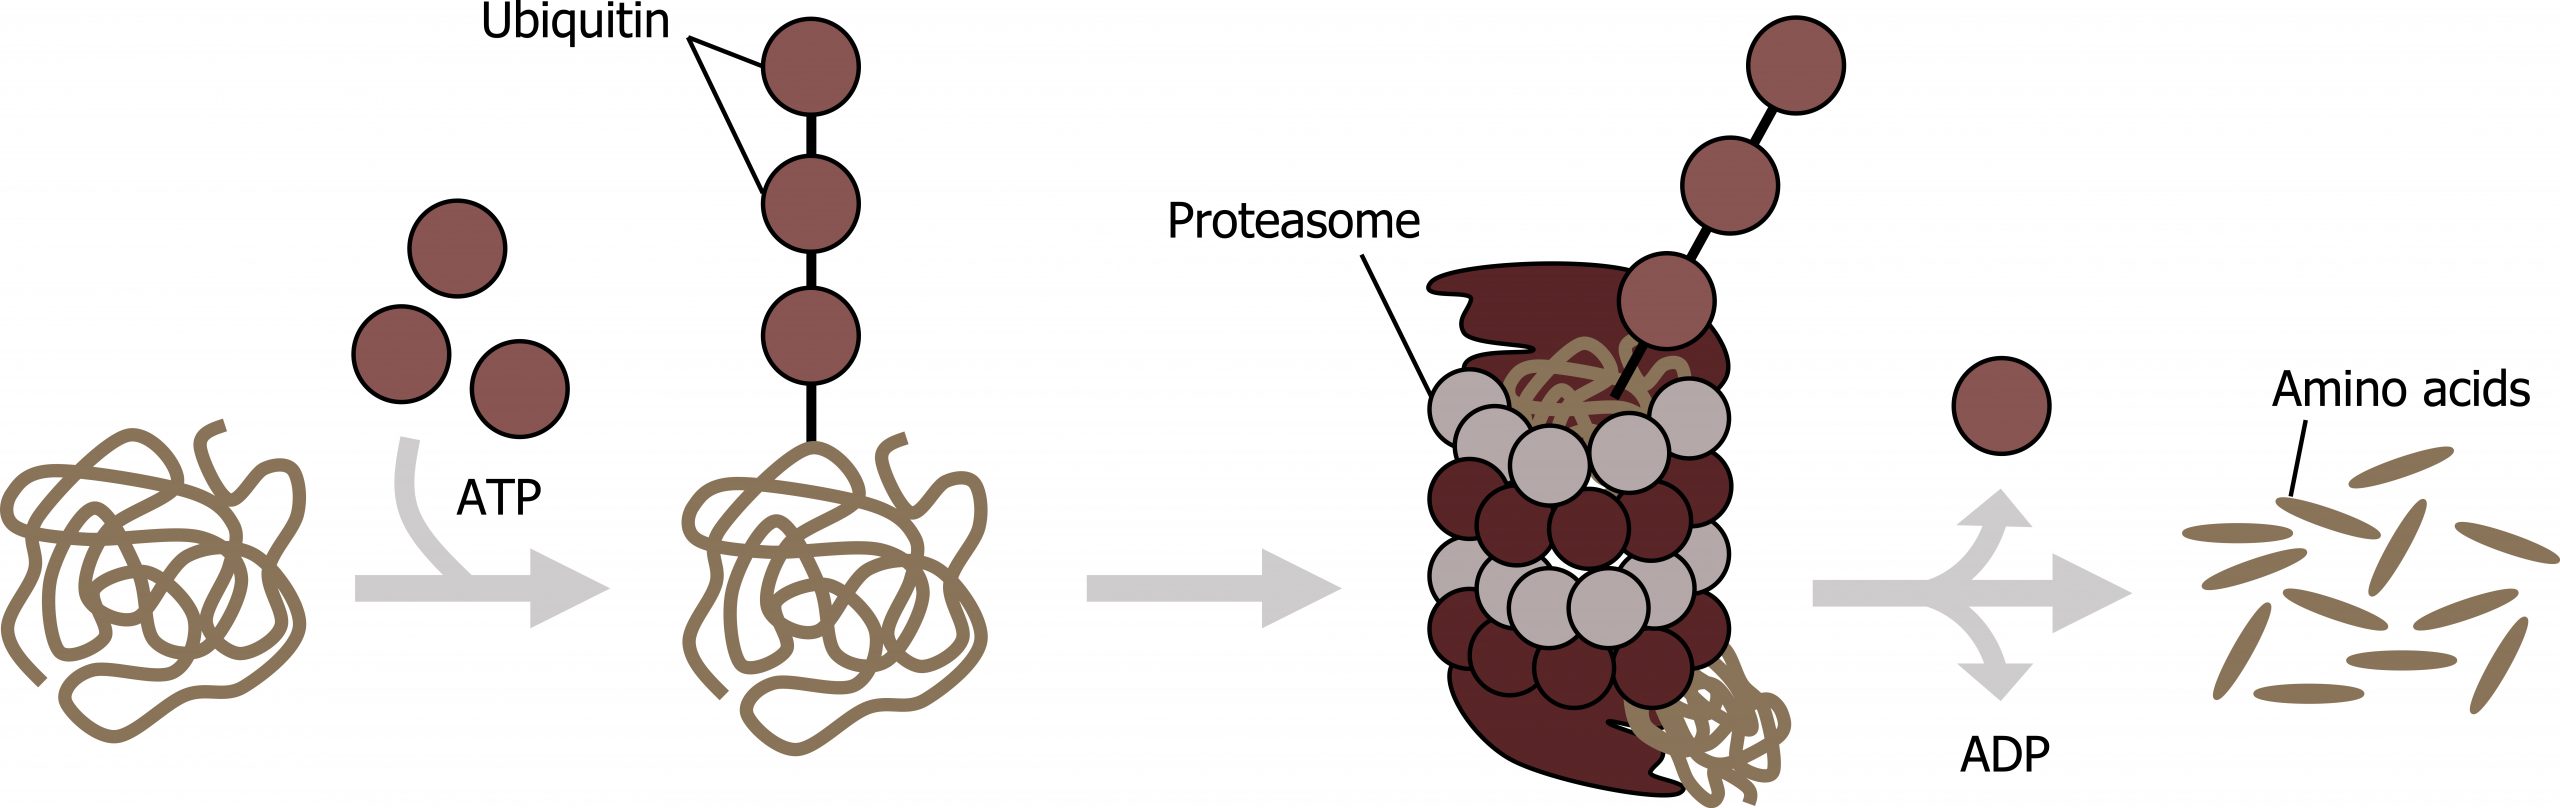 Protein arrow with ATP addition to protein with bound ubiquitin arrow to proteasome wrapped around protein with bound ubiquitin arrow with loss of ADP and ubiquitin to multiple free amino acids.